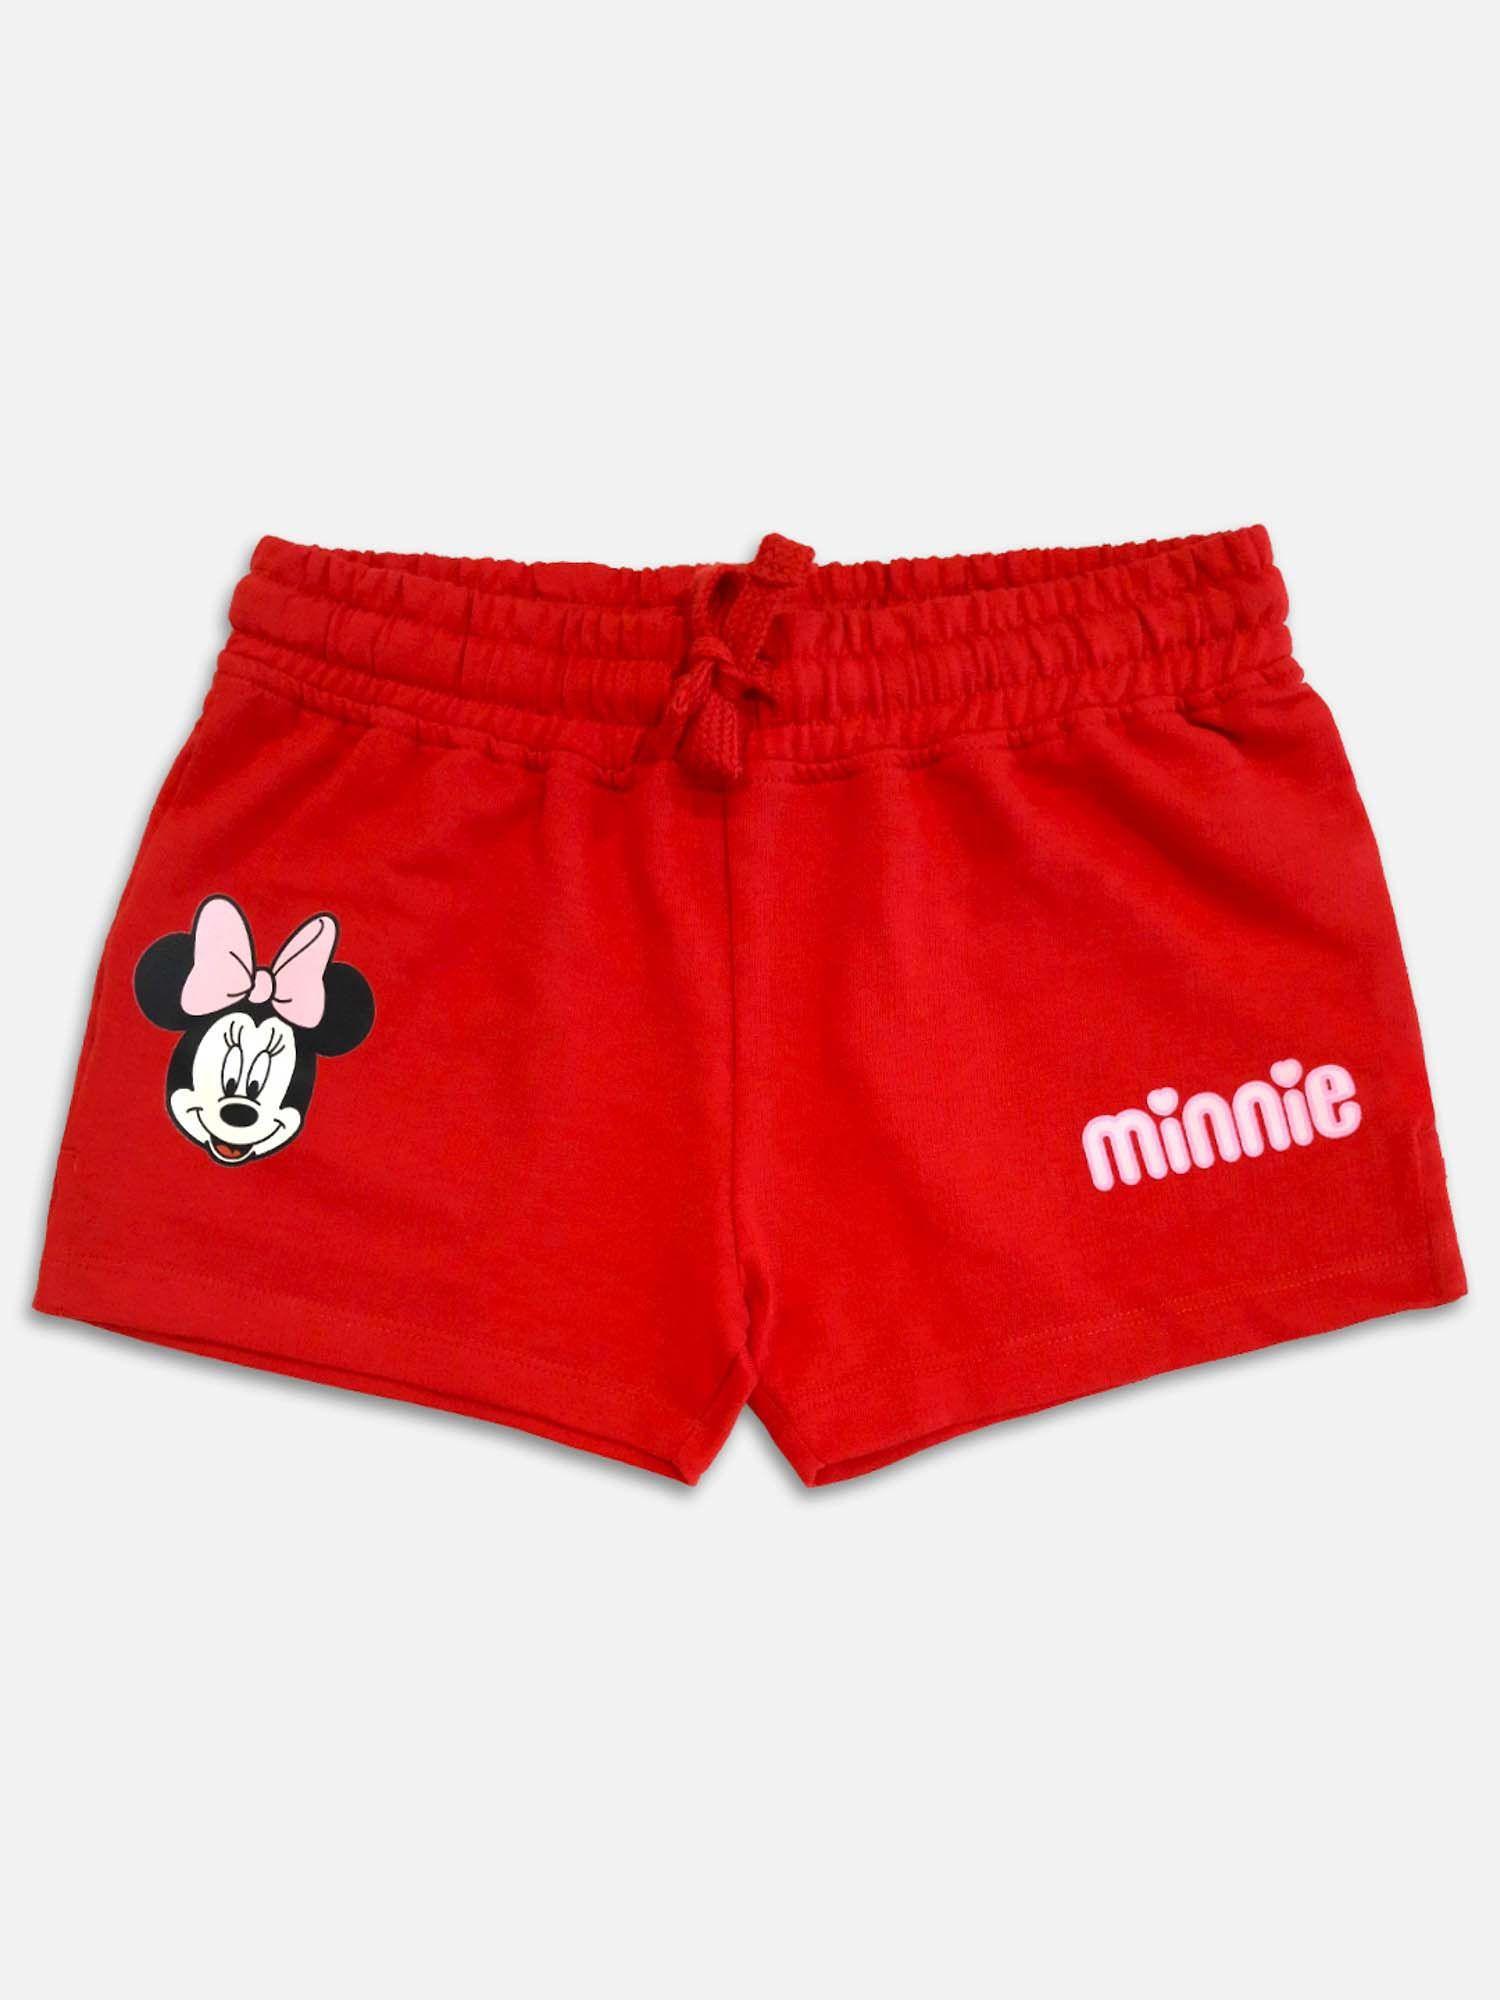 Mickey & Friends Featured Shorts for Girls - Red